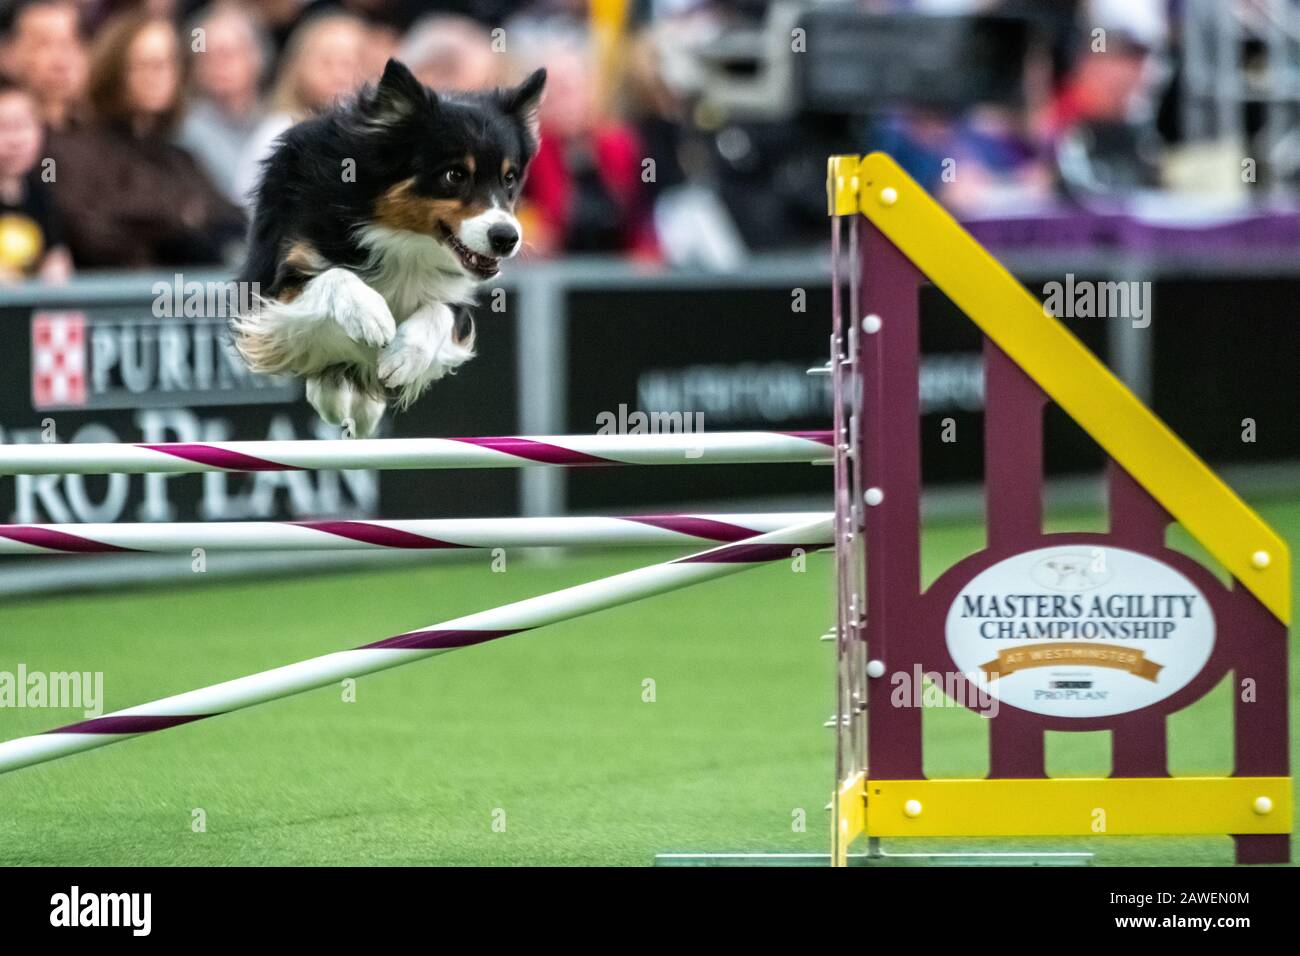 New York, USA. 8th Feb, 2020. Jockey, an Australian Shepherd, clears an obstacle during the qualifying round of The Westminster Kennel Club Dog show Masters Agility Championship in New York city. Credit: Enrique Shore/Alamy Live News Stock Photo